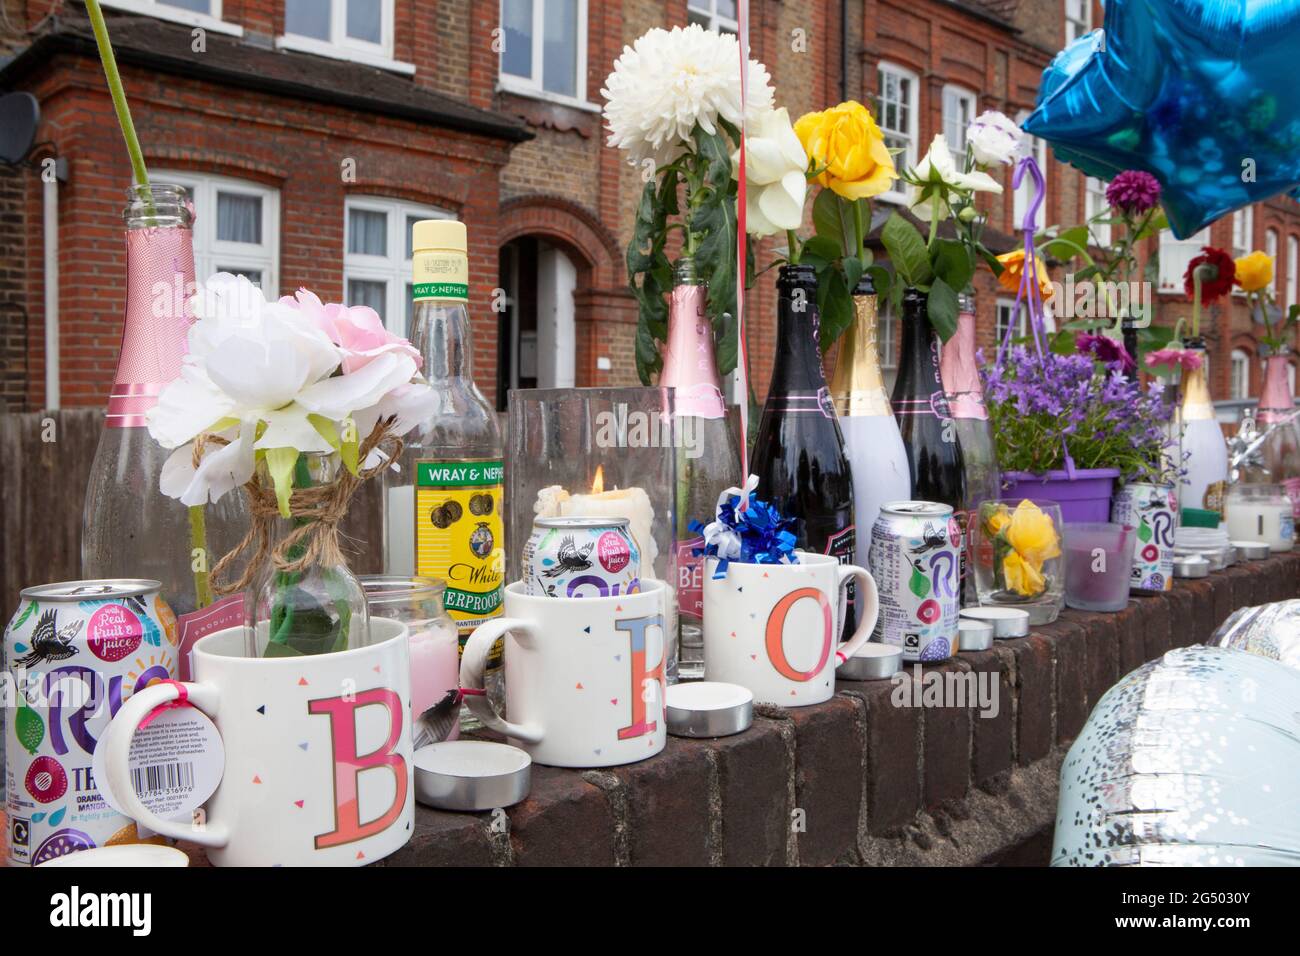 London, UK, 24 June 2021: Tributes line a wall on Bedford Hill in Balham where Mattias Poleon, 27, was shot dead outside his home on 17 June 2021. Tributes include flowers, candles, framed photos, bottles of alcohol and Father's Day balloons. Anna Watson/Alamy Live News. Stock Photo